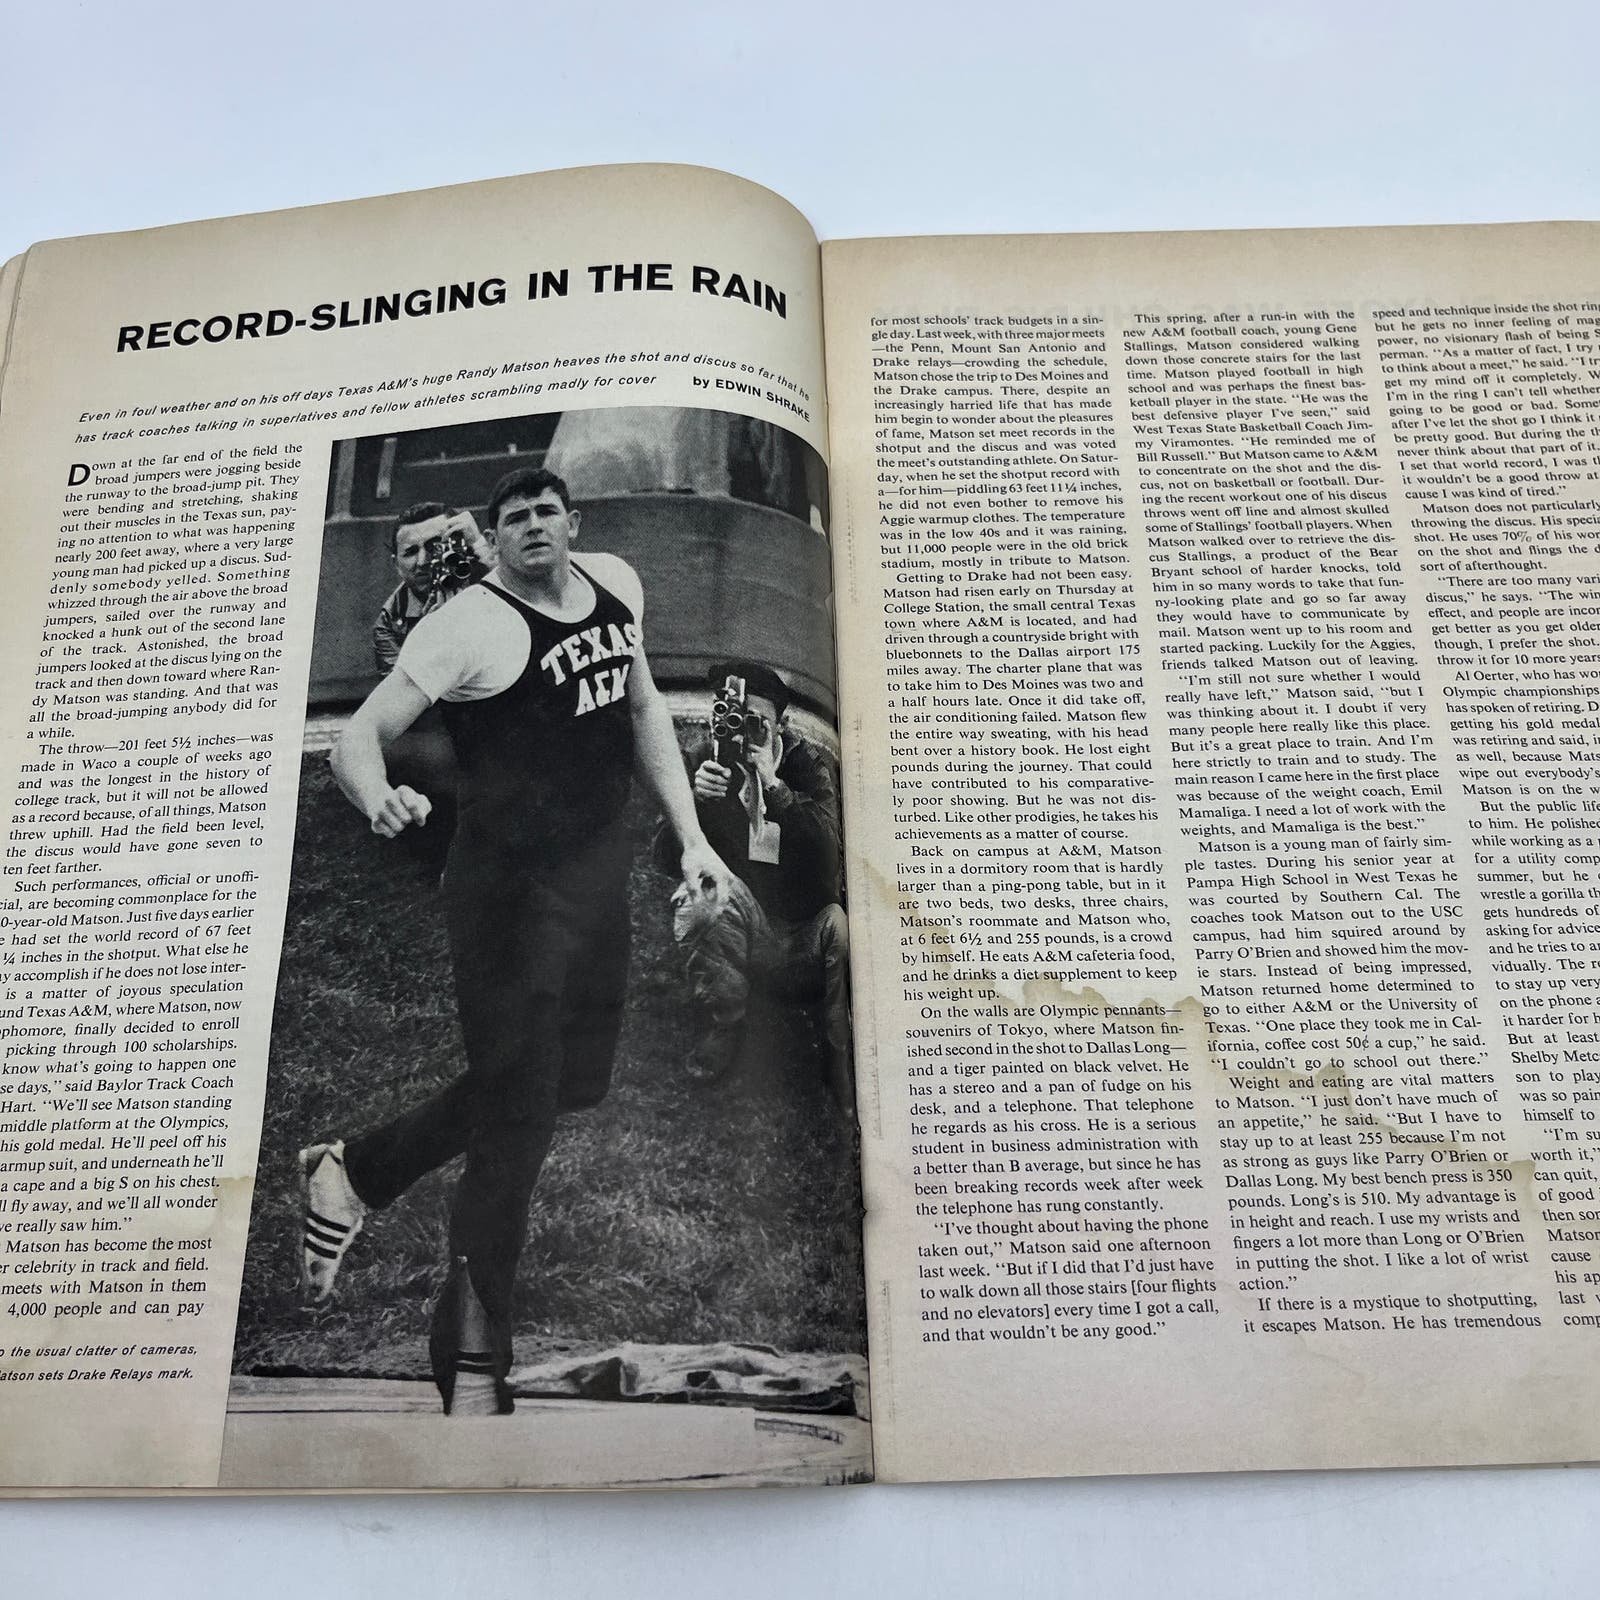 1965 Sports Illustrated KENTUCKY Derby BOLD LAD Lucky Debonair Horse Racing TH7 G94L9JT46